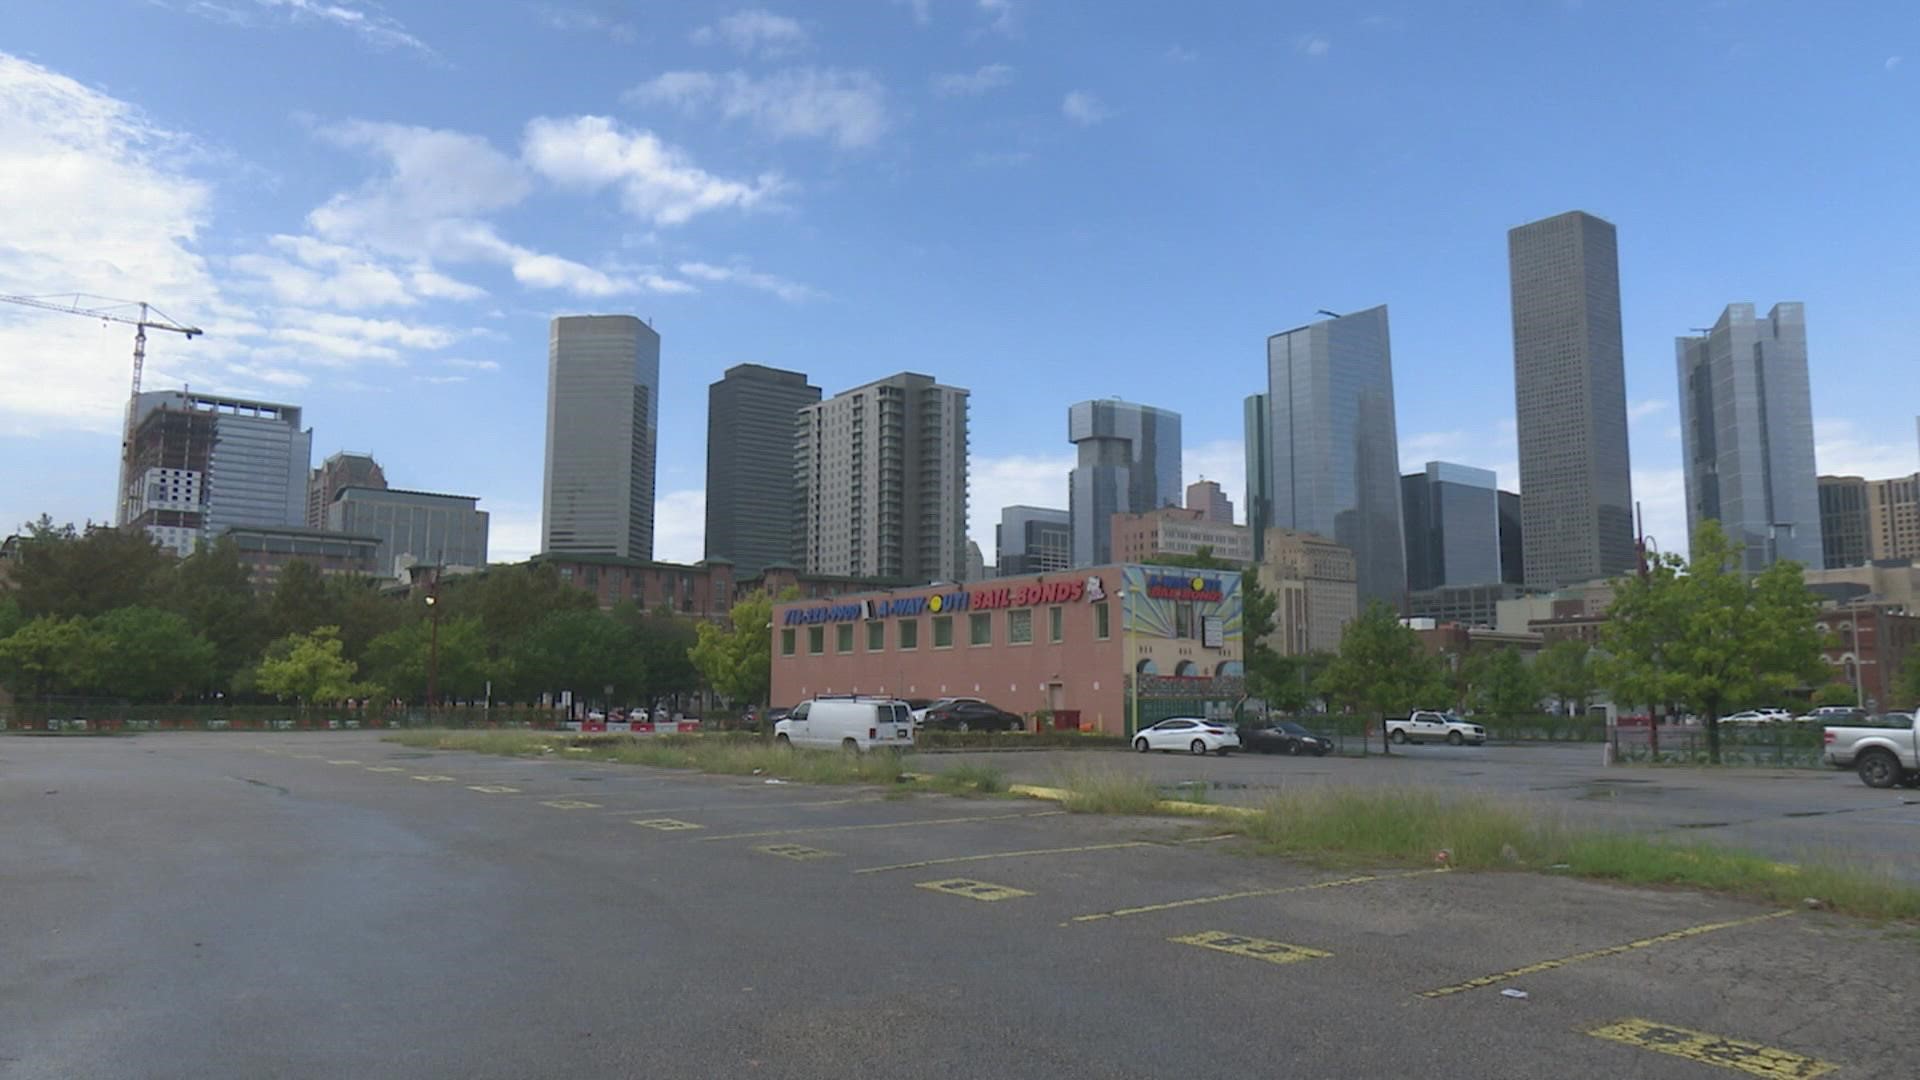 The boom is much-needed as the pandemic really put a damper on business in the Bayou City.